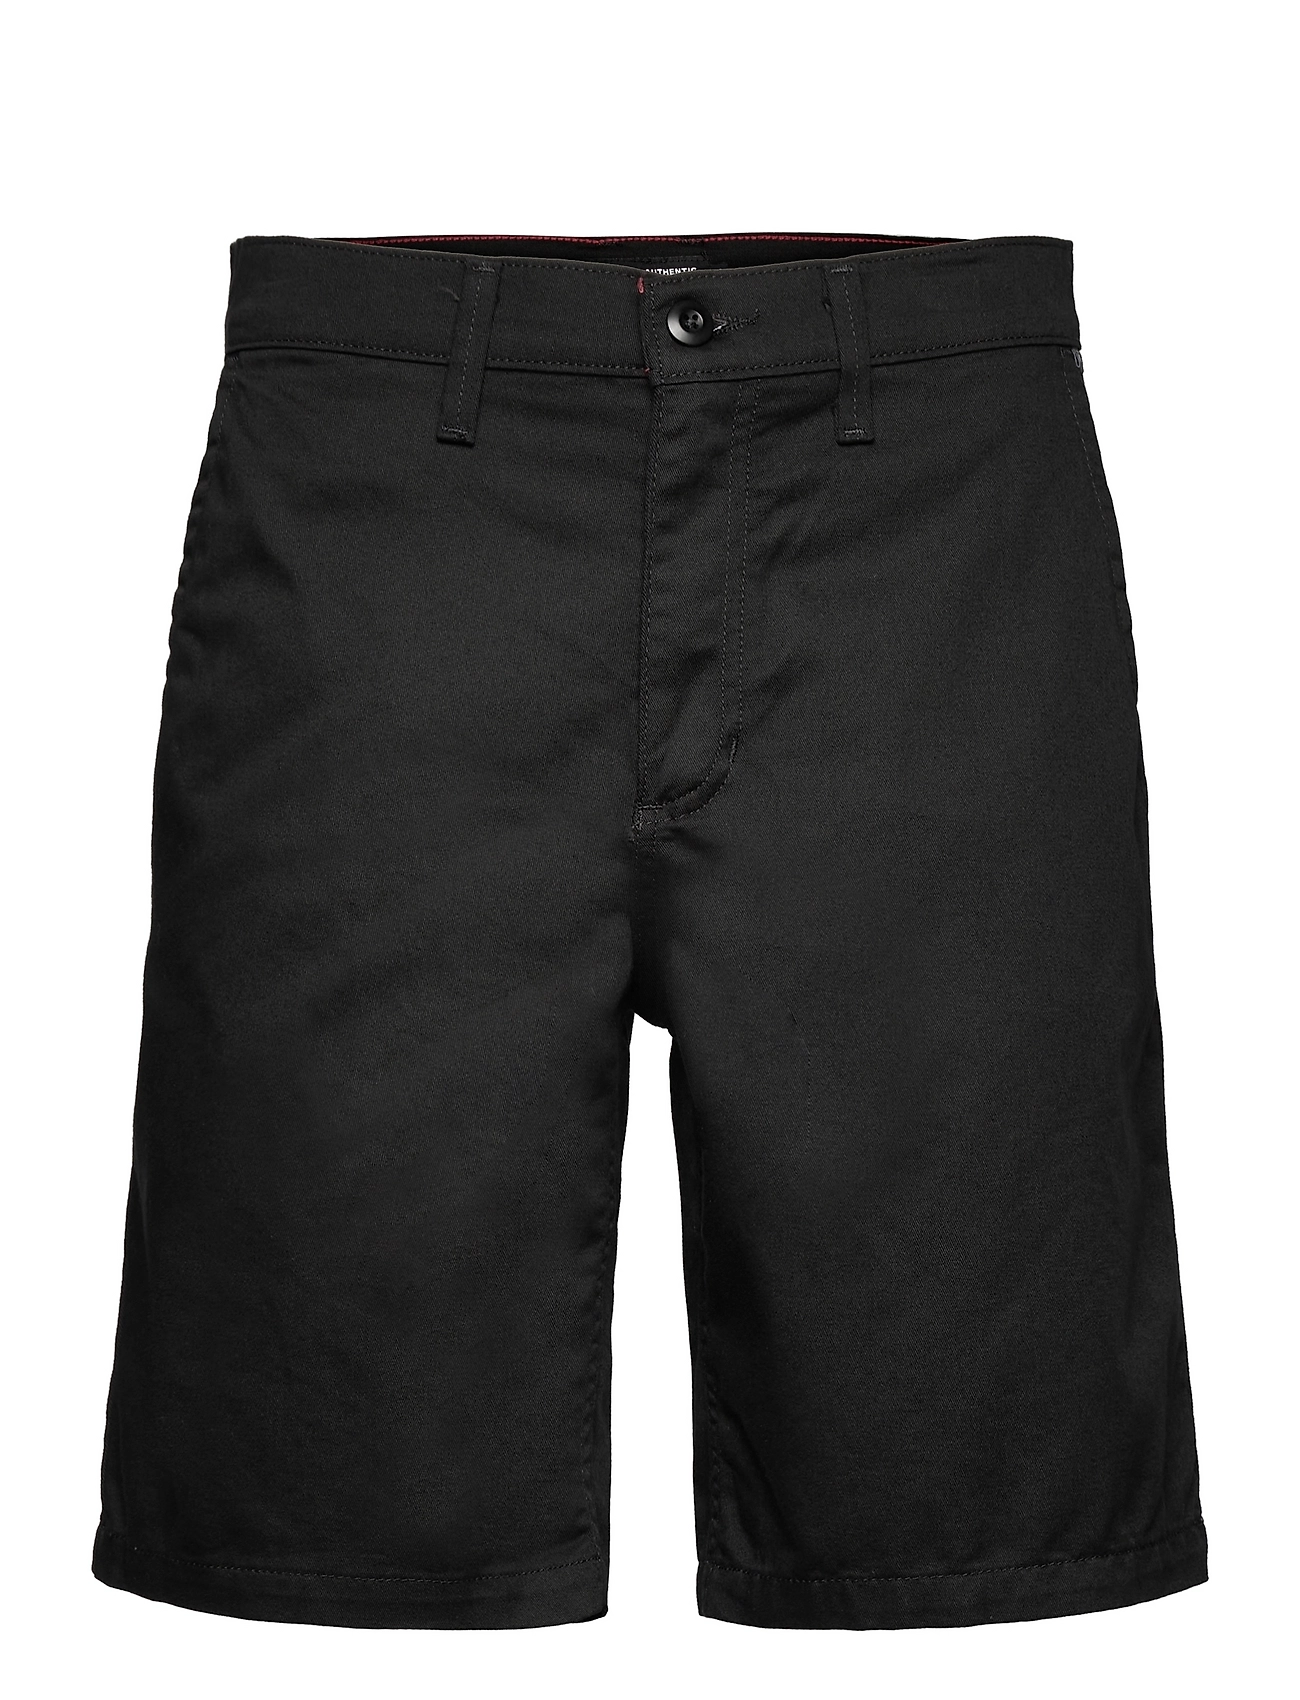 Mn Authentic Chino Relaxed Short Sport Shorts Chinos Shorts Black VANS